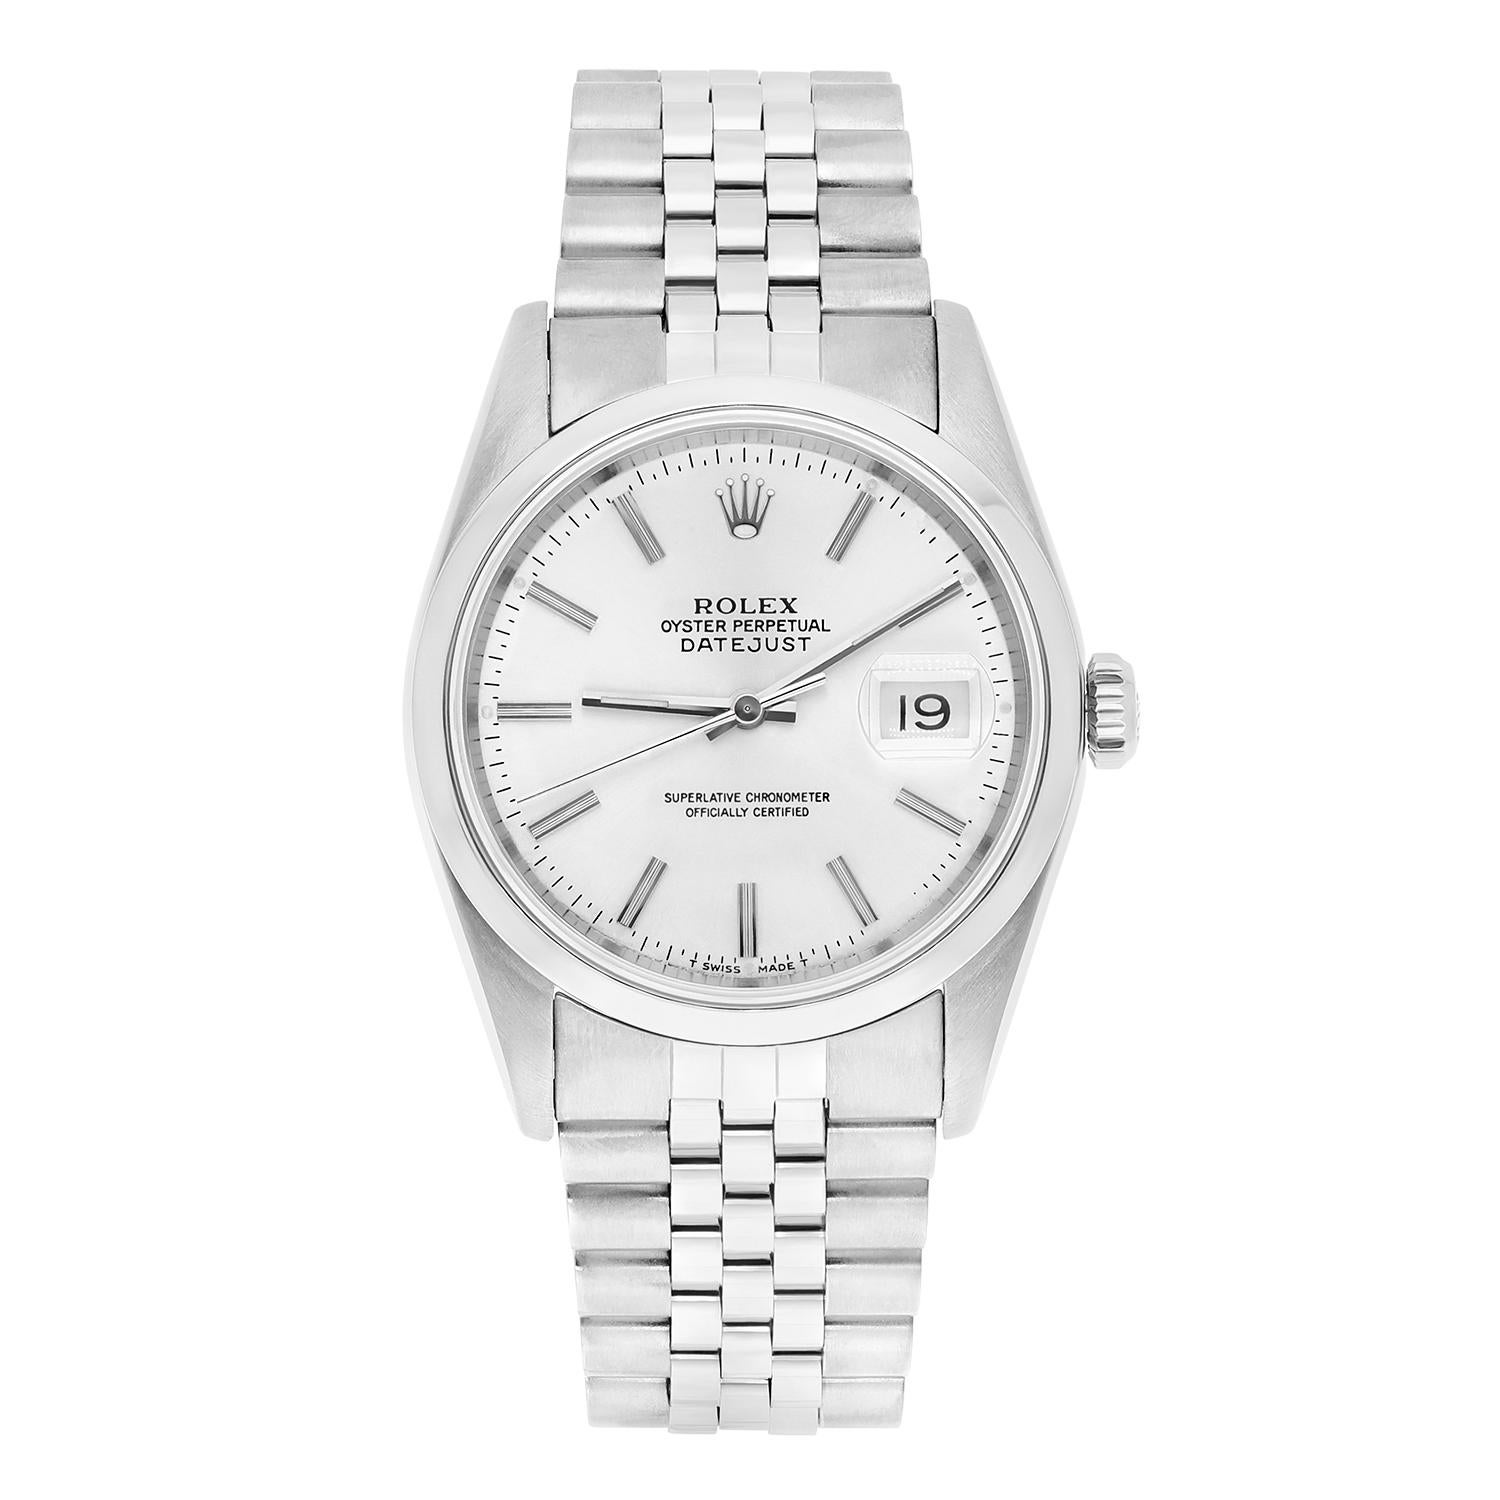 Silver-tone stainless steel case with a silver-tone stainless steel juThis watch has been professionally polished, serviced and is in excellent overall condition. There are absolutely no visible scratches or blemishes. Model features quick-set